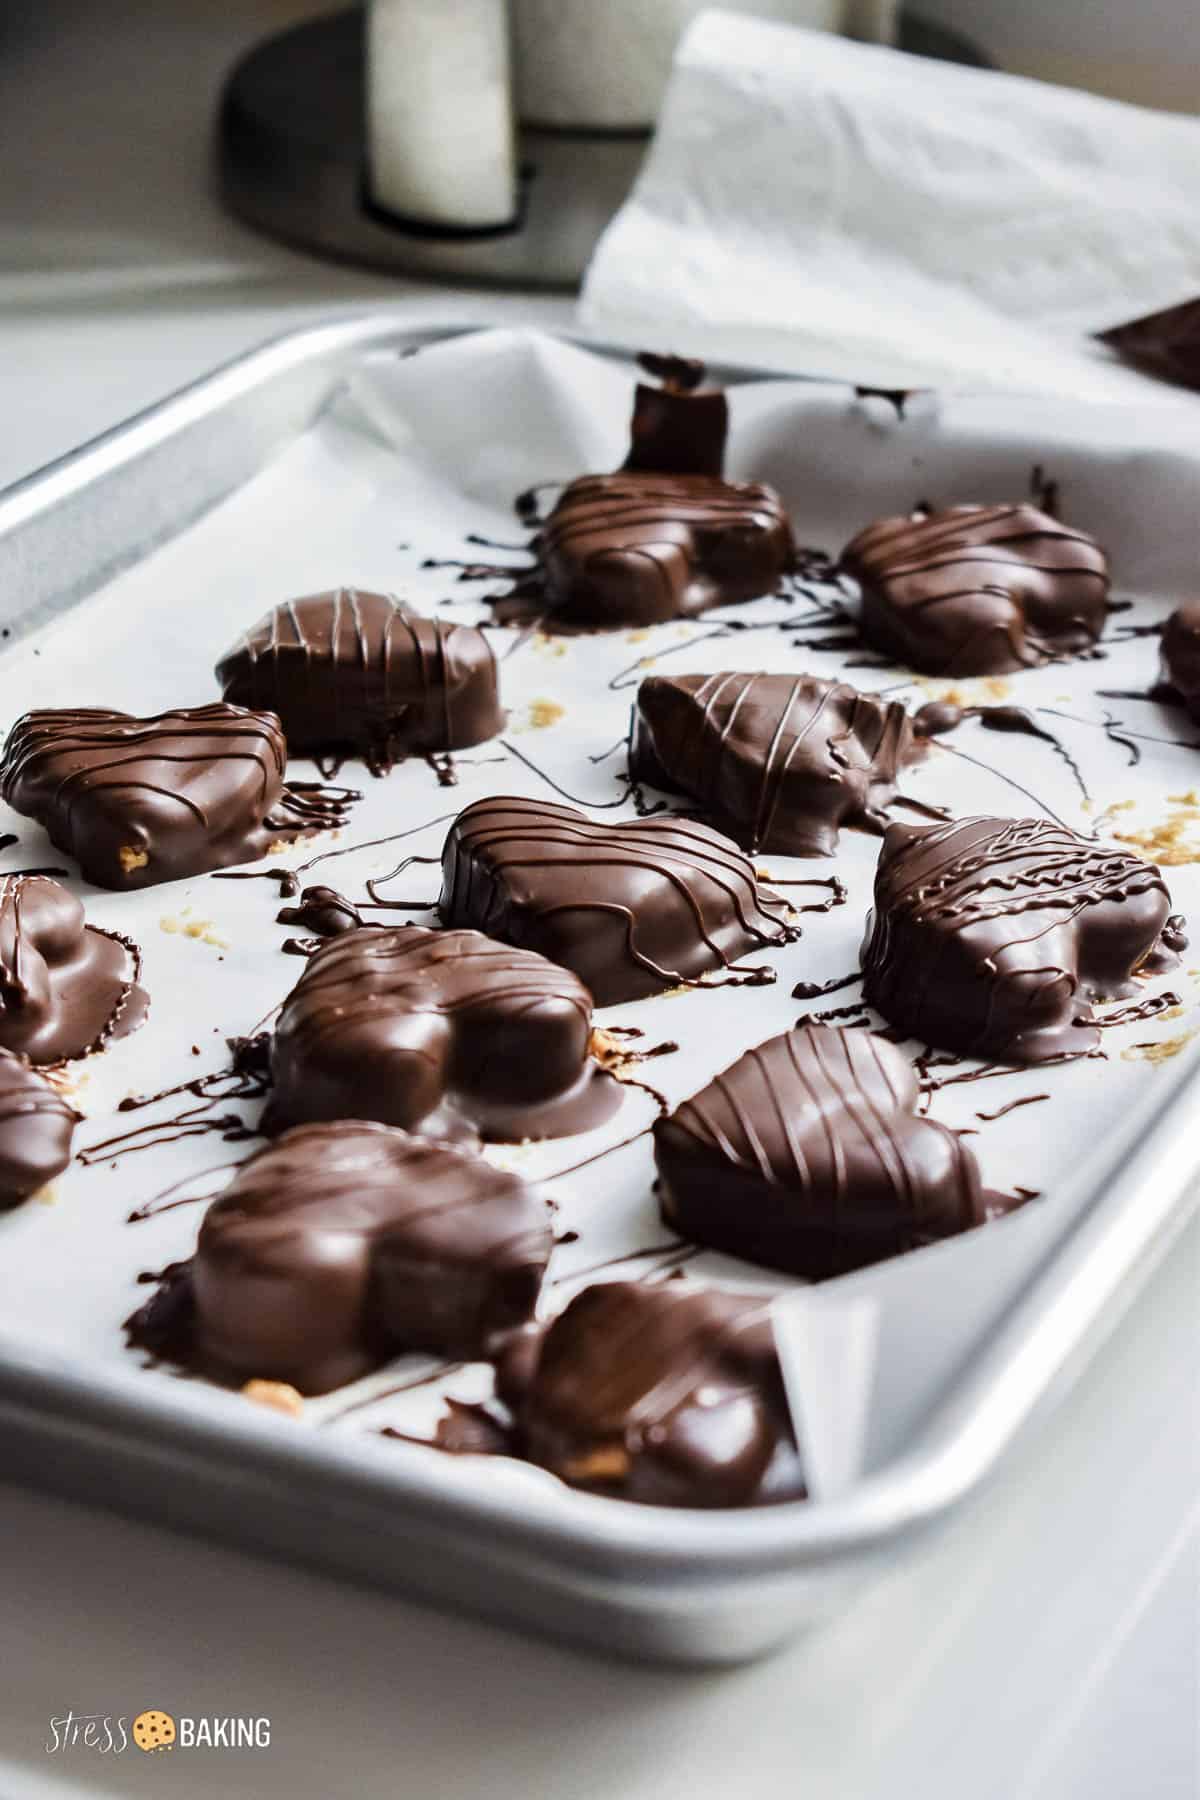 Chocolate dipped hearts drizzled with chocolate on parchment paper